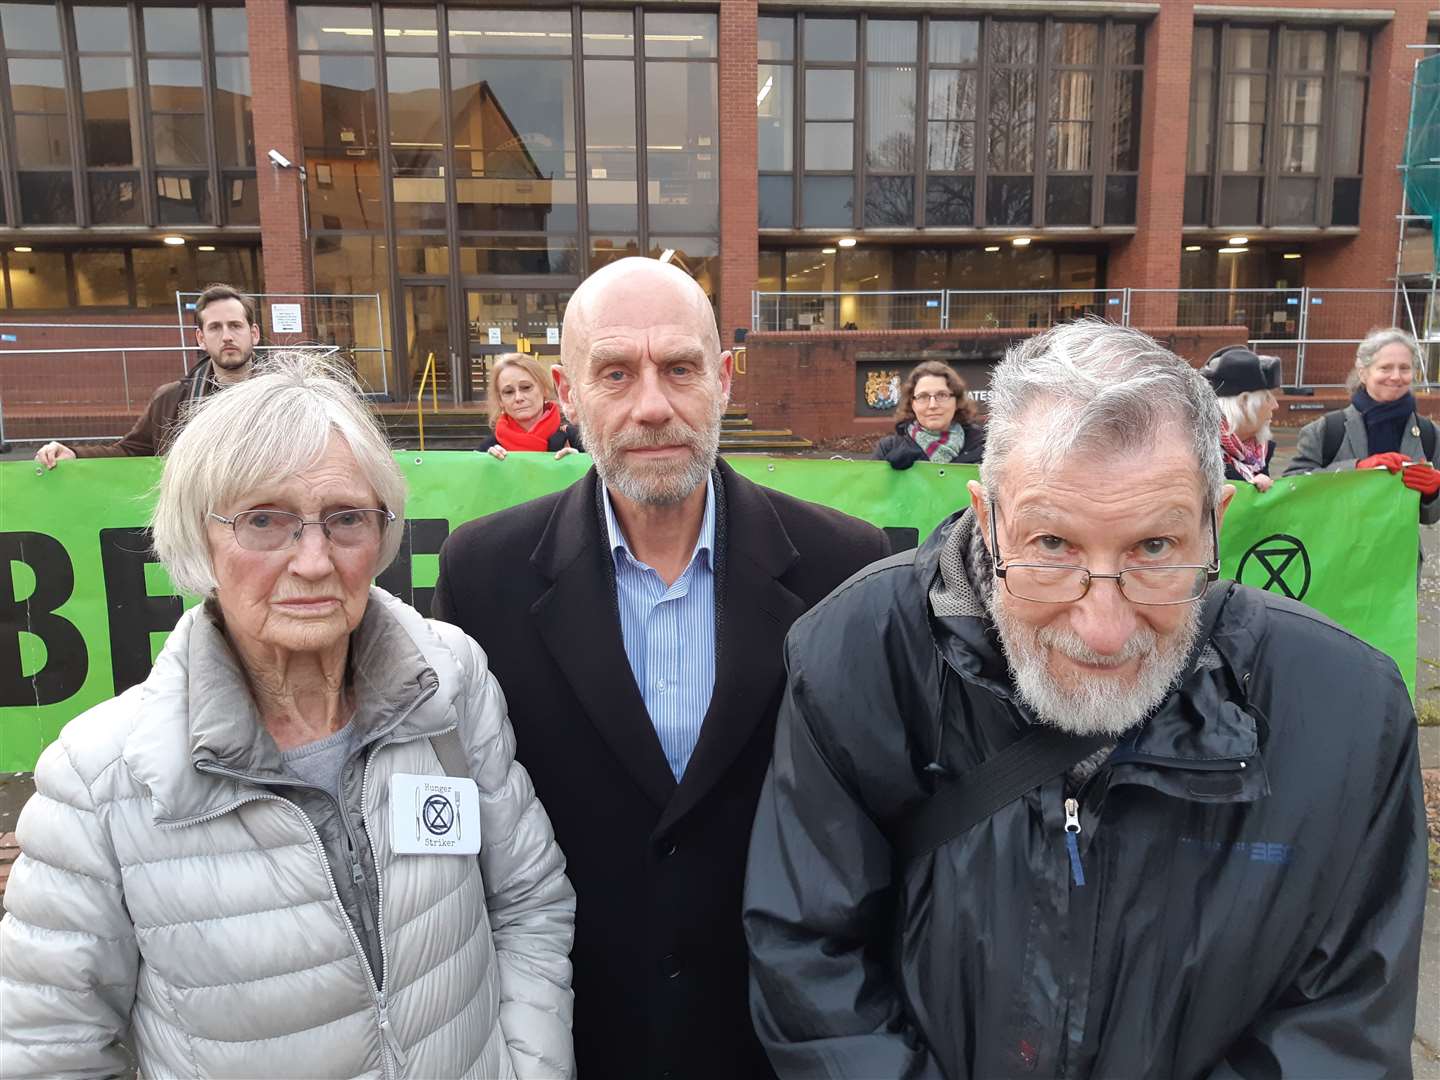 Pethick, Halladay and Lynes (right) outside court today after their hearing. Extinction Rebellion supporters are in the background